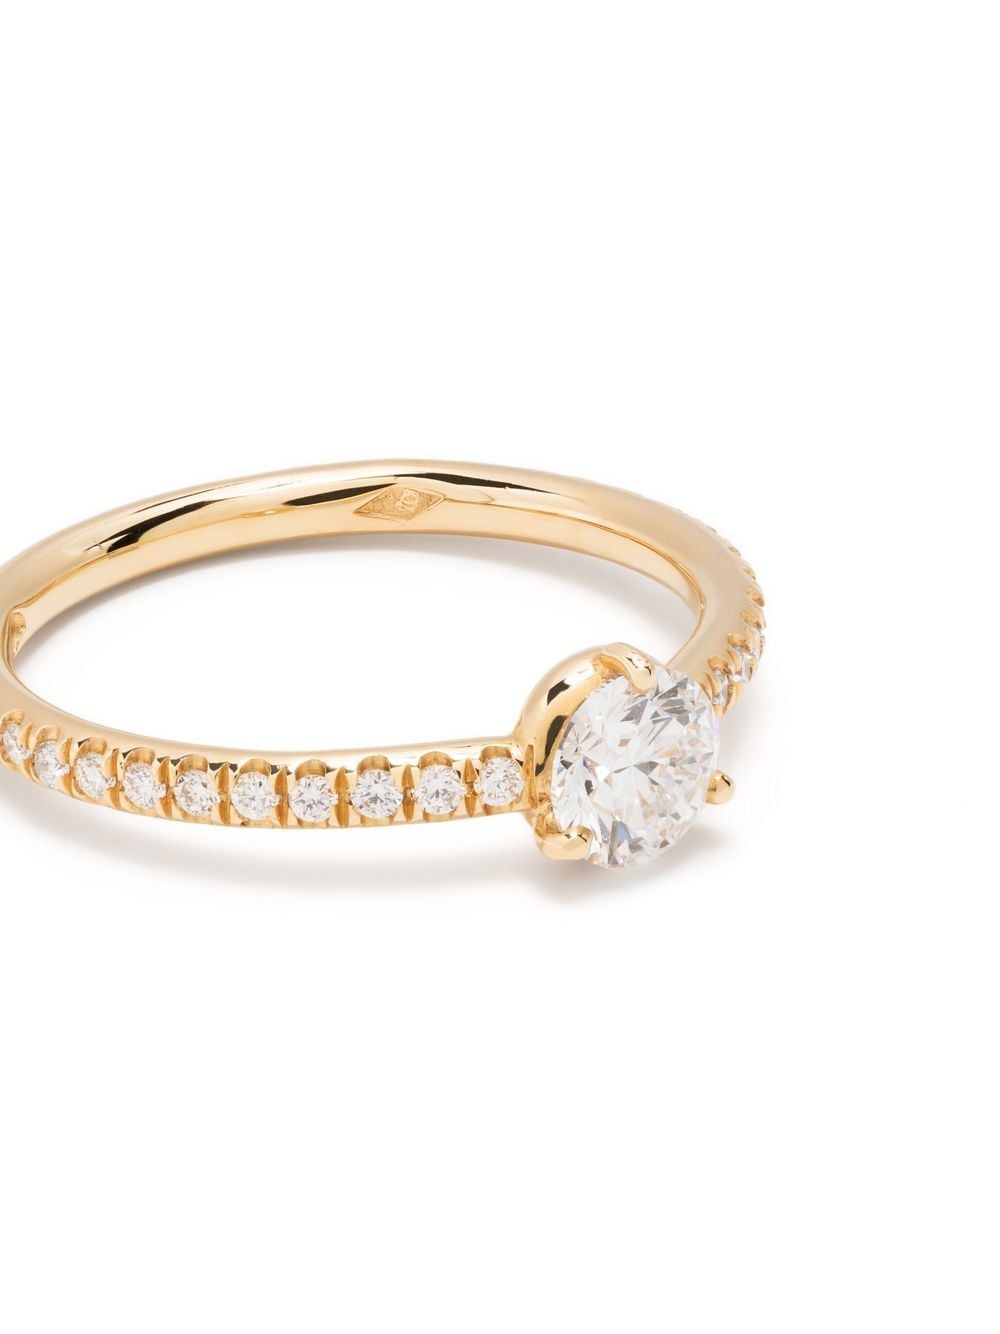 18KT YELLOW GOLD DIAMOND SOLITAIRE RING